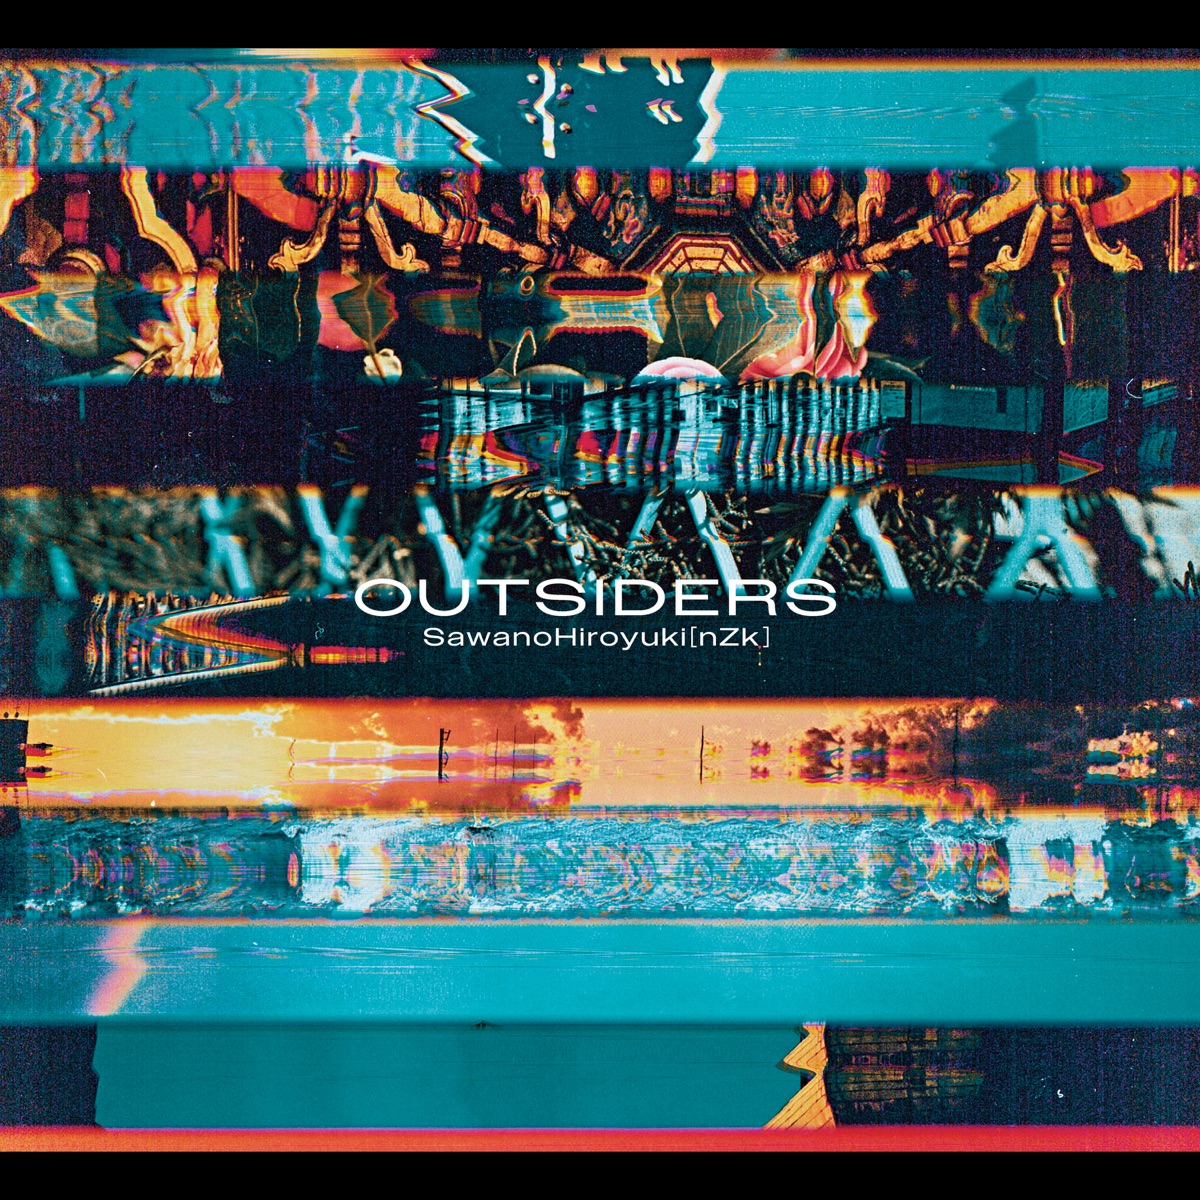 Cover for『SawanoHiroyuki[nZk]:Laco - Roads to Ride ＜LCv＞』from the release『OUTSIDERS』